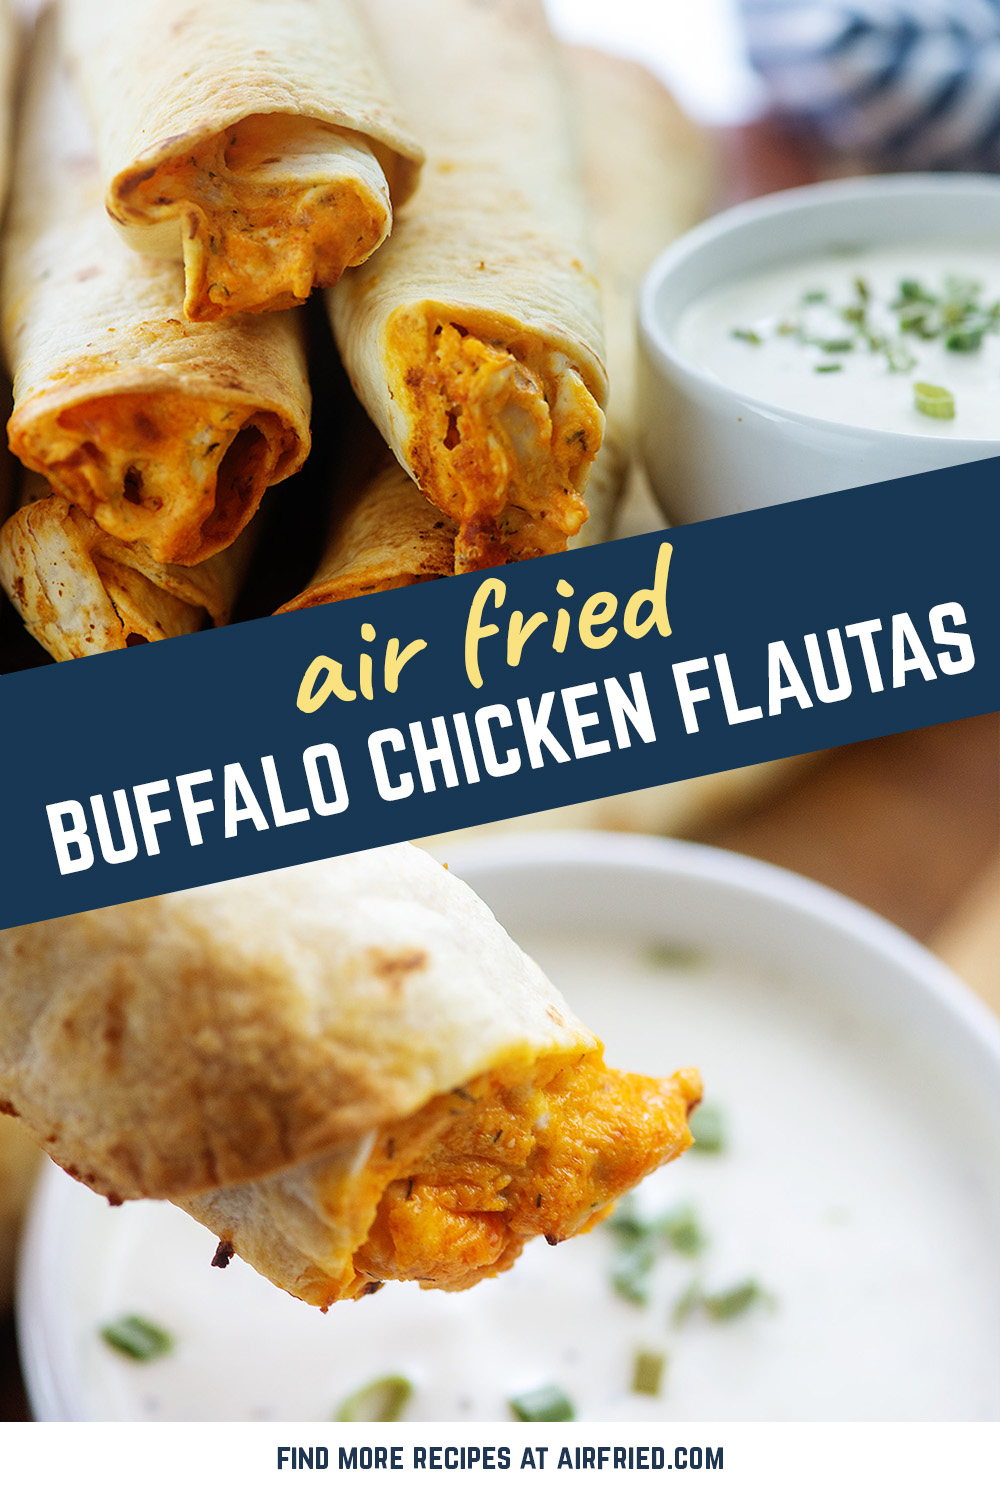 These air fried buffalo chicken flautas are easy and delicious! #airfried #chicken #flautas